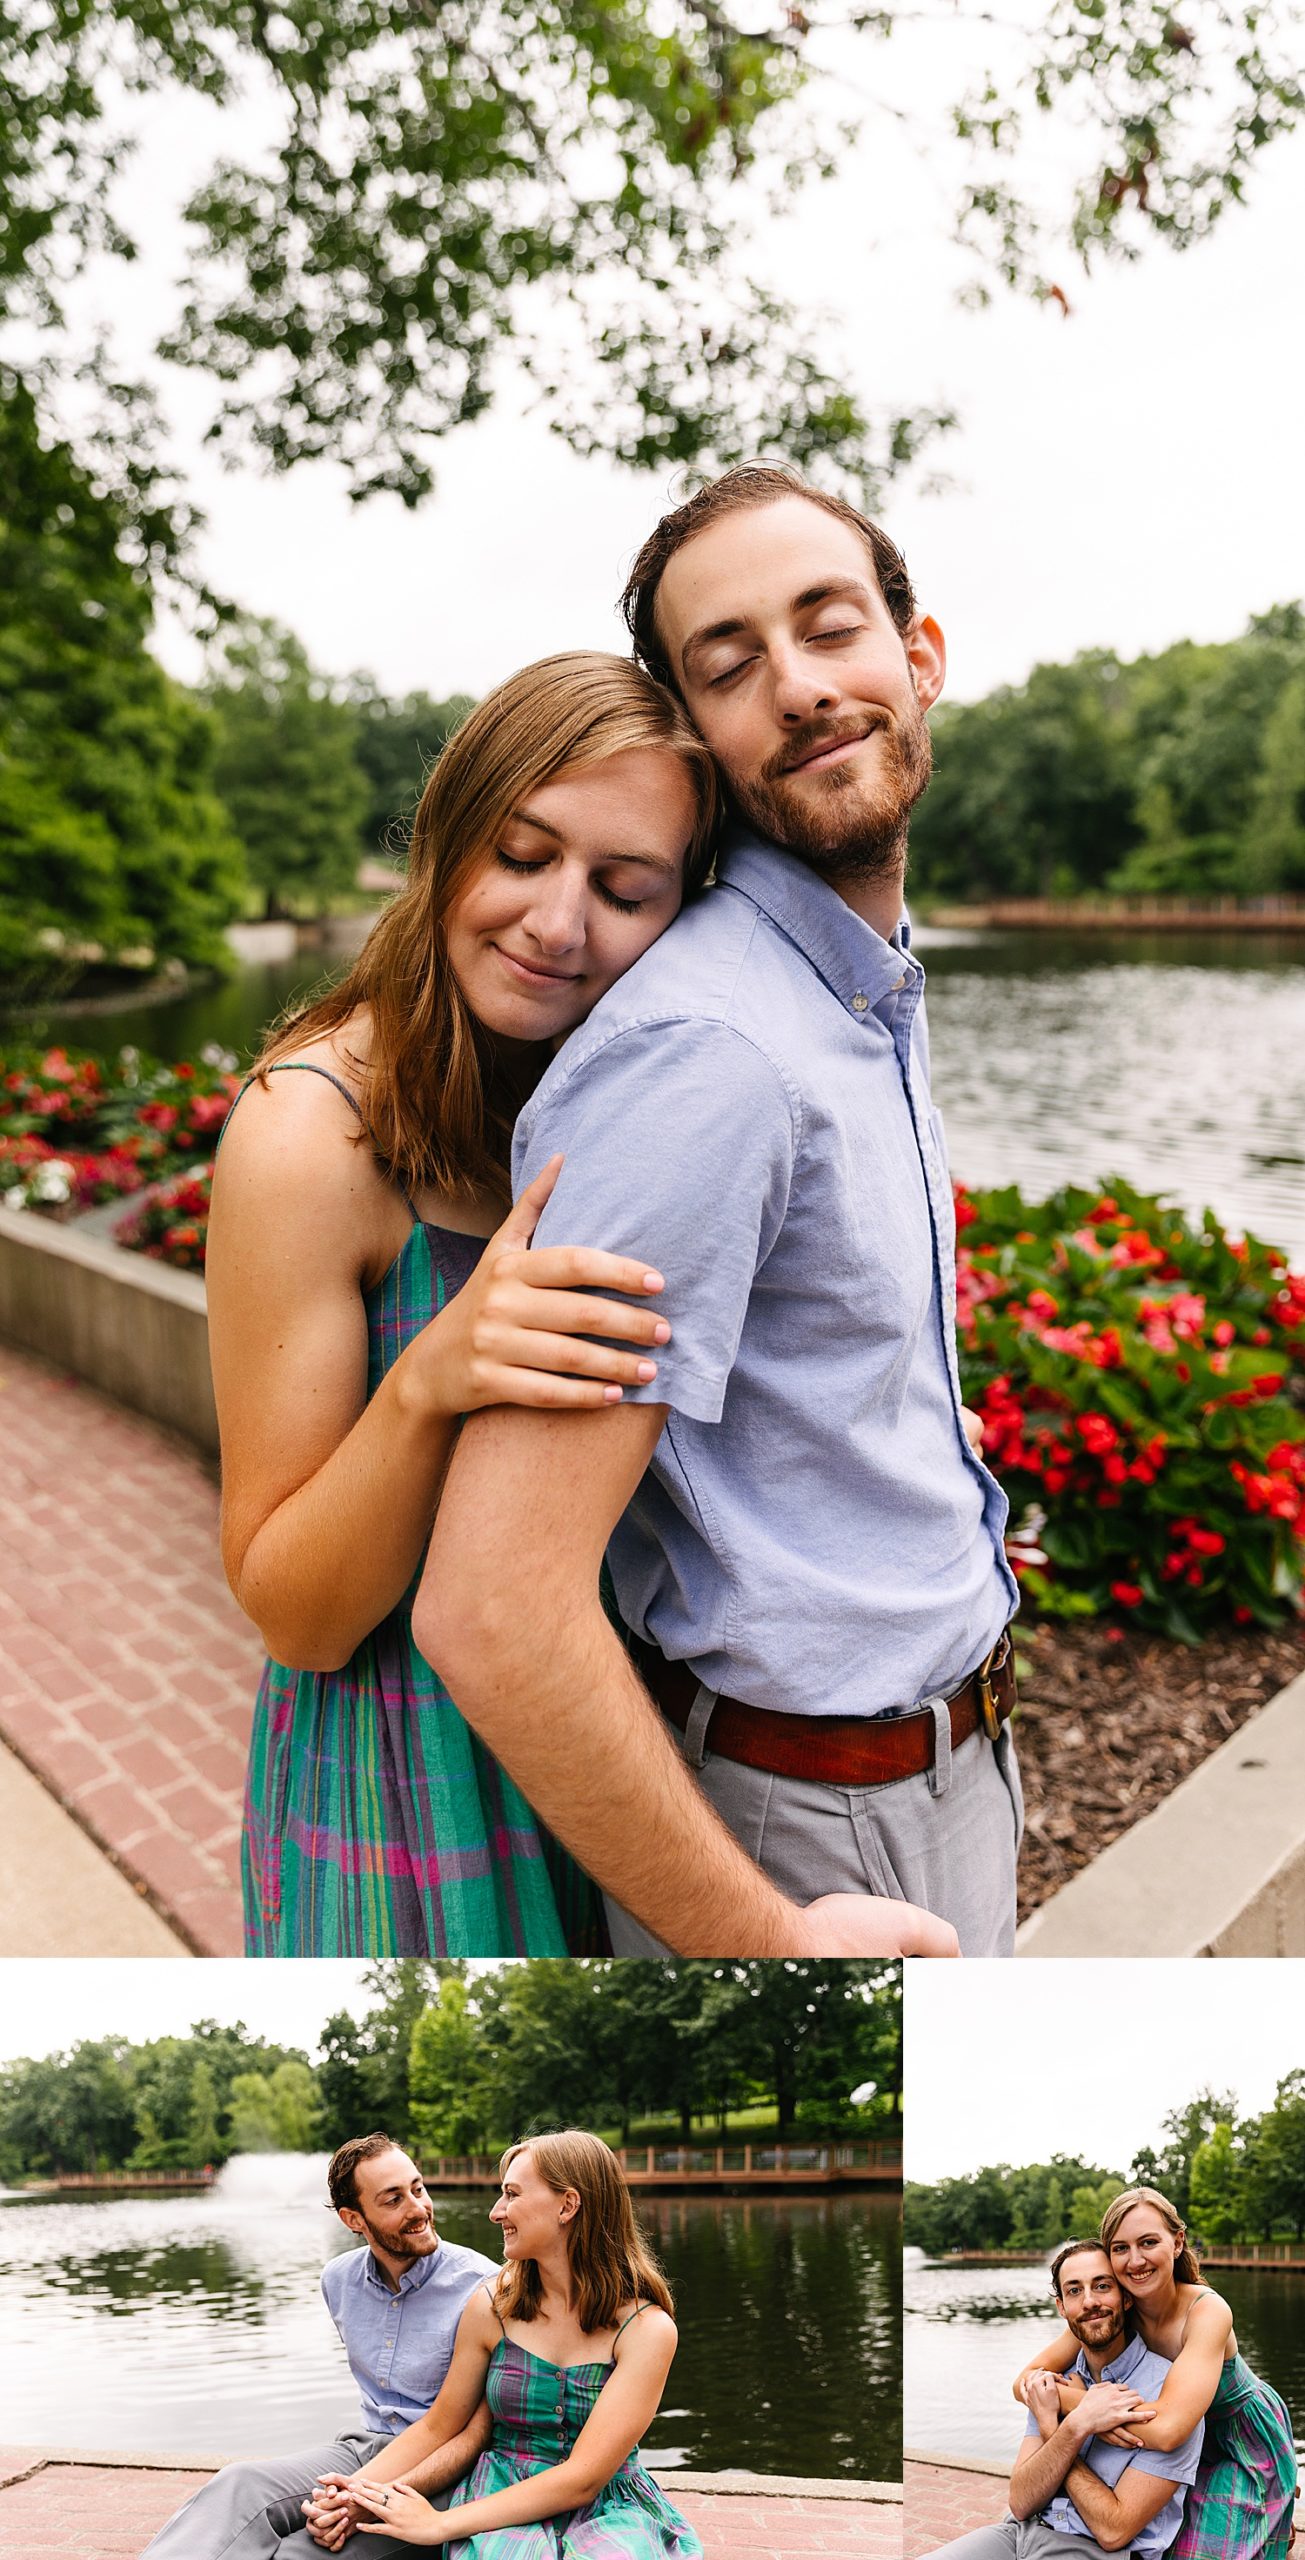 Antioch park engagement couple during the spring with flowers bloomed smiling together 